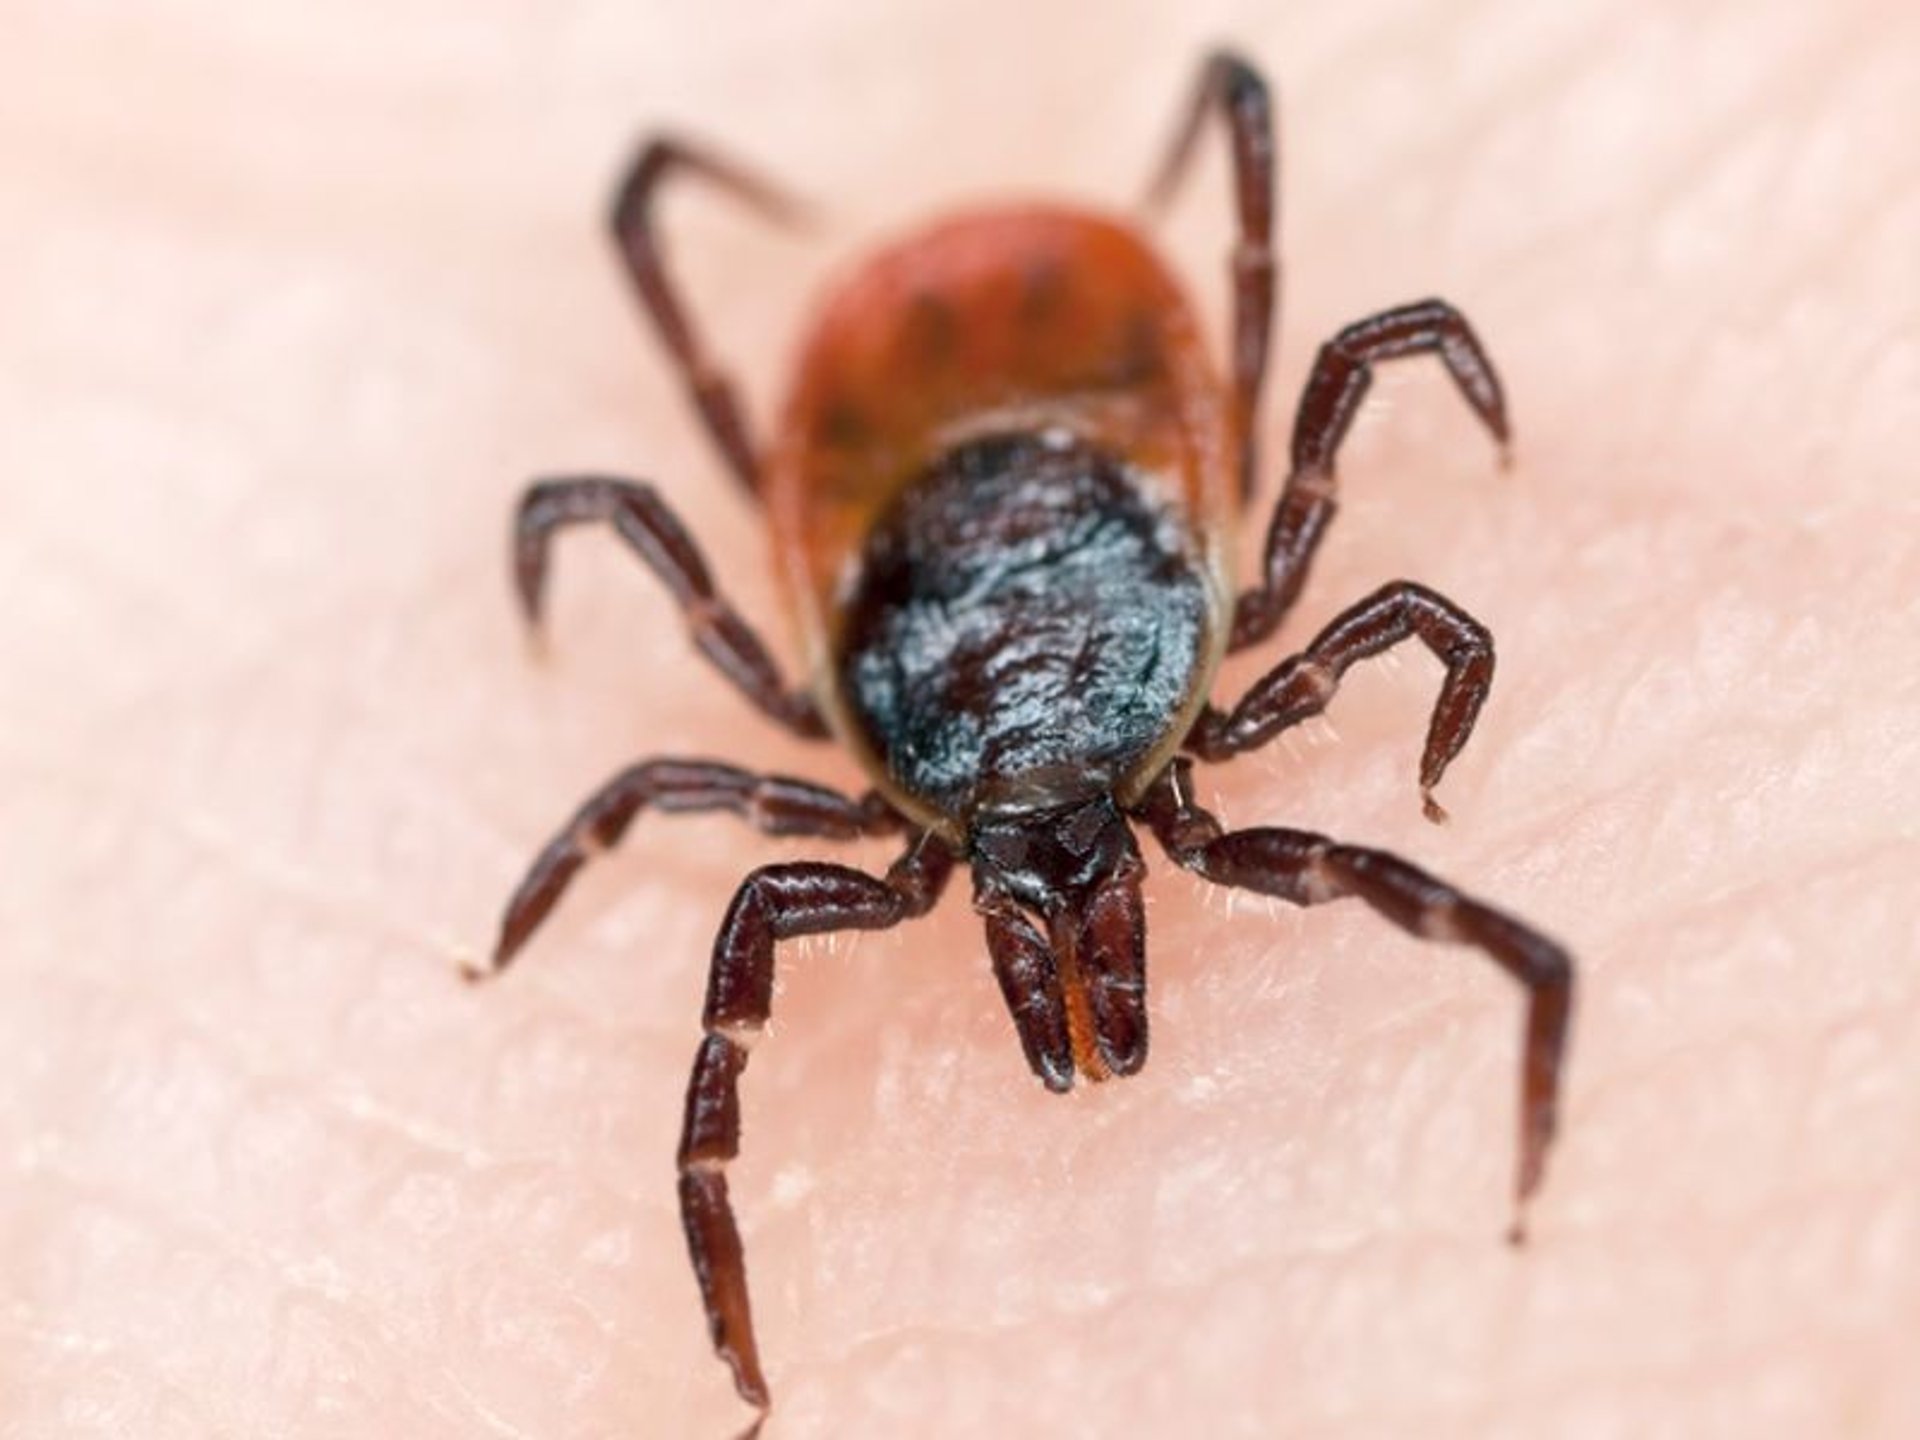 Global Warming Has Ticks Jumping From Dogs to Humans thumbnail